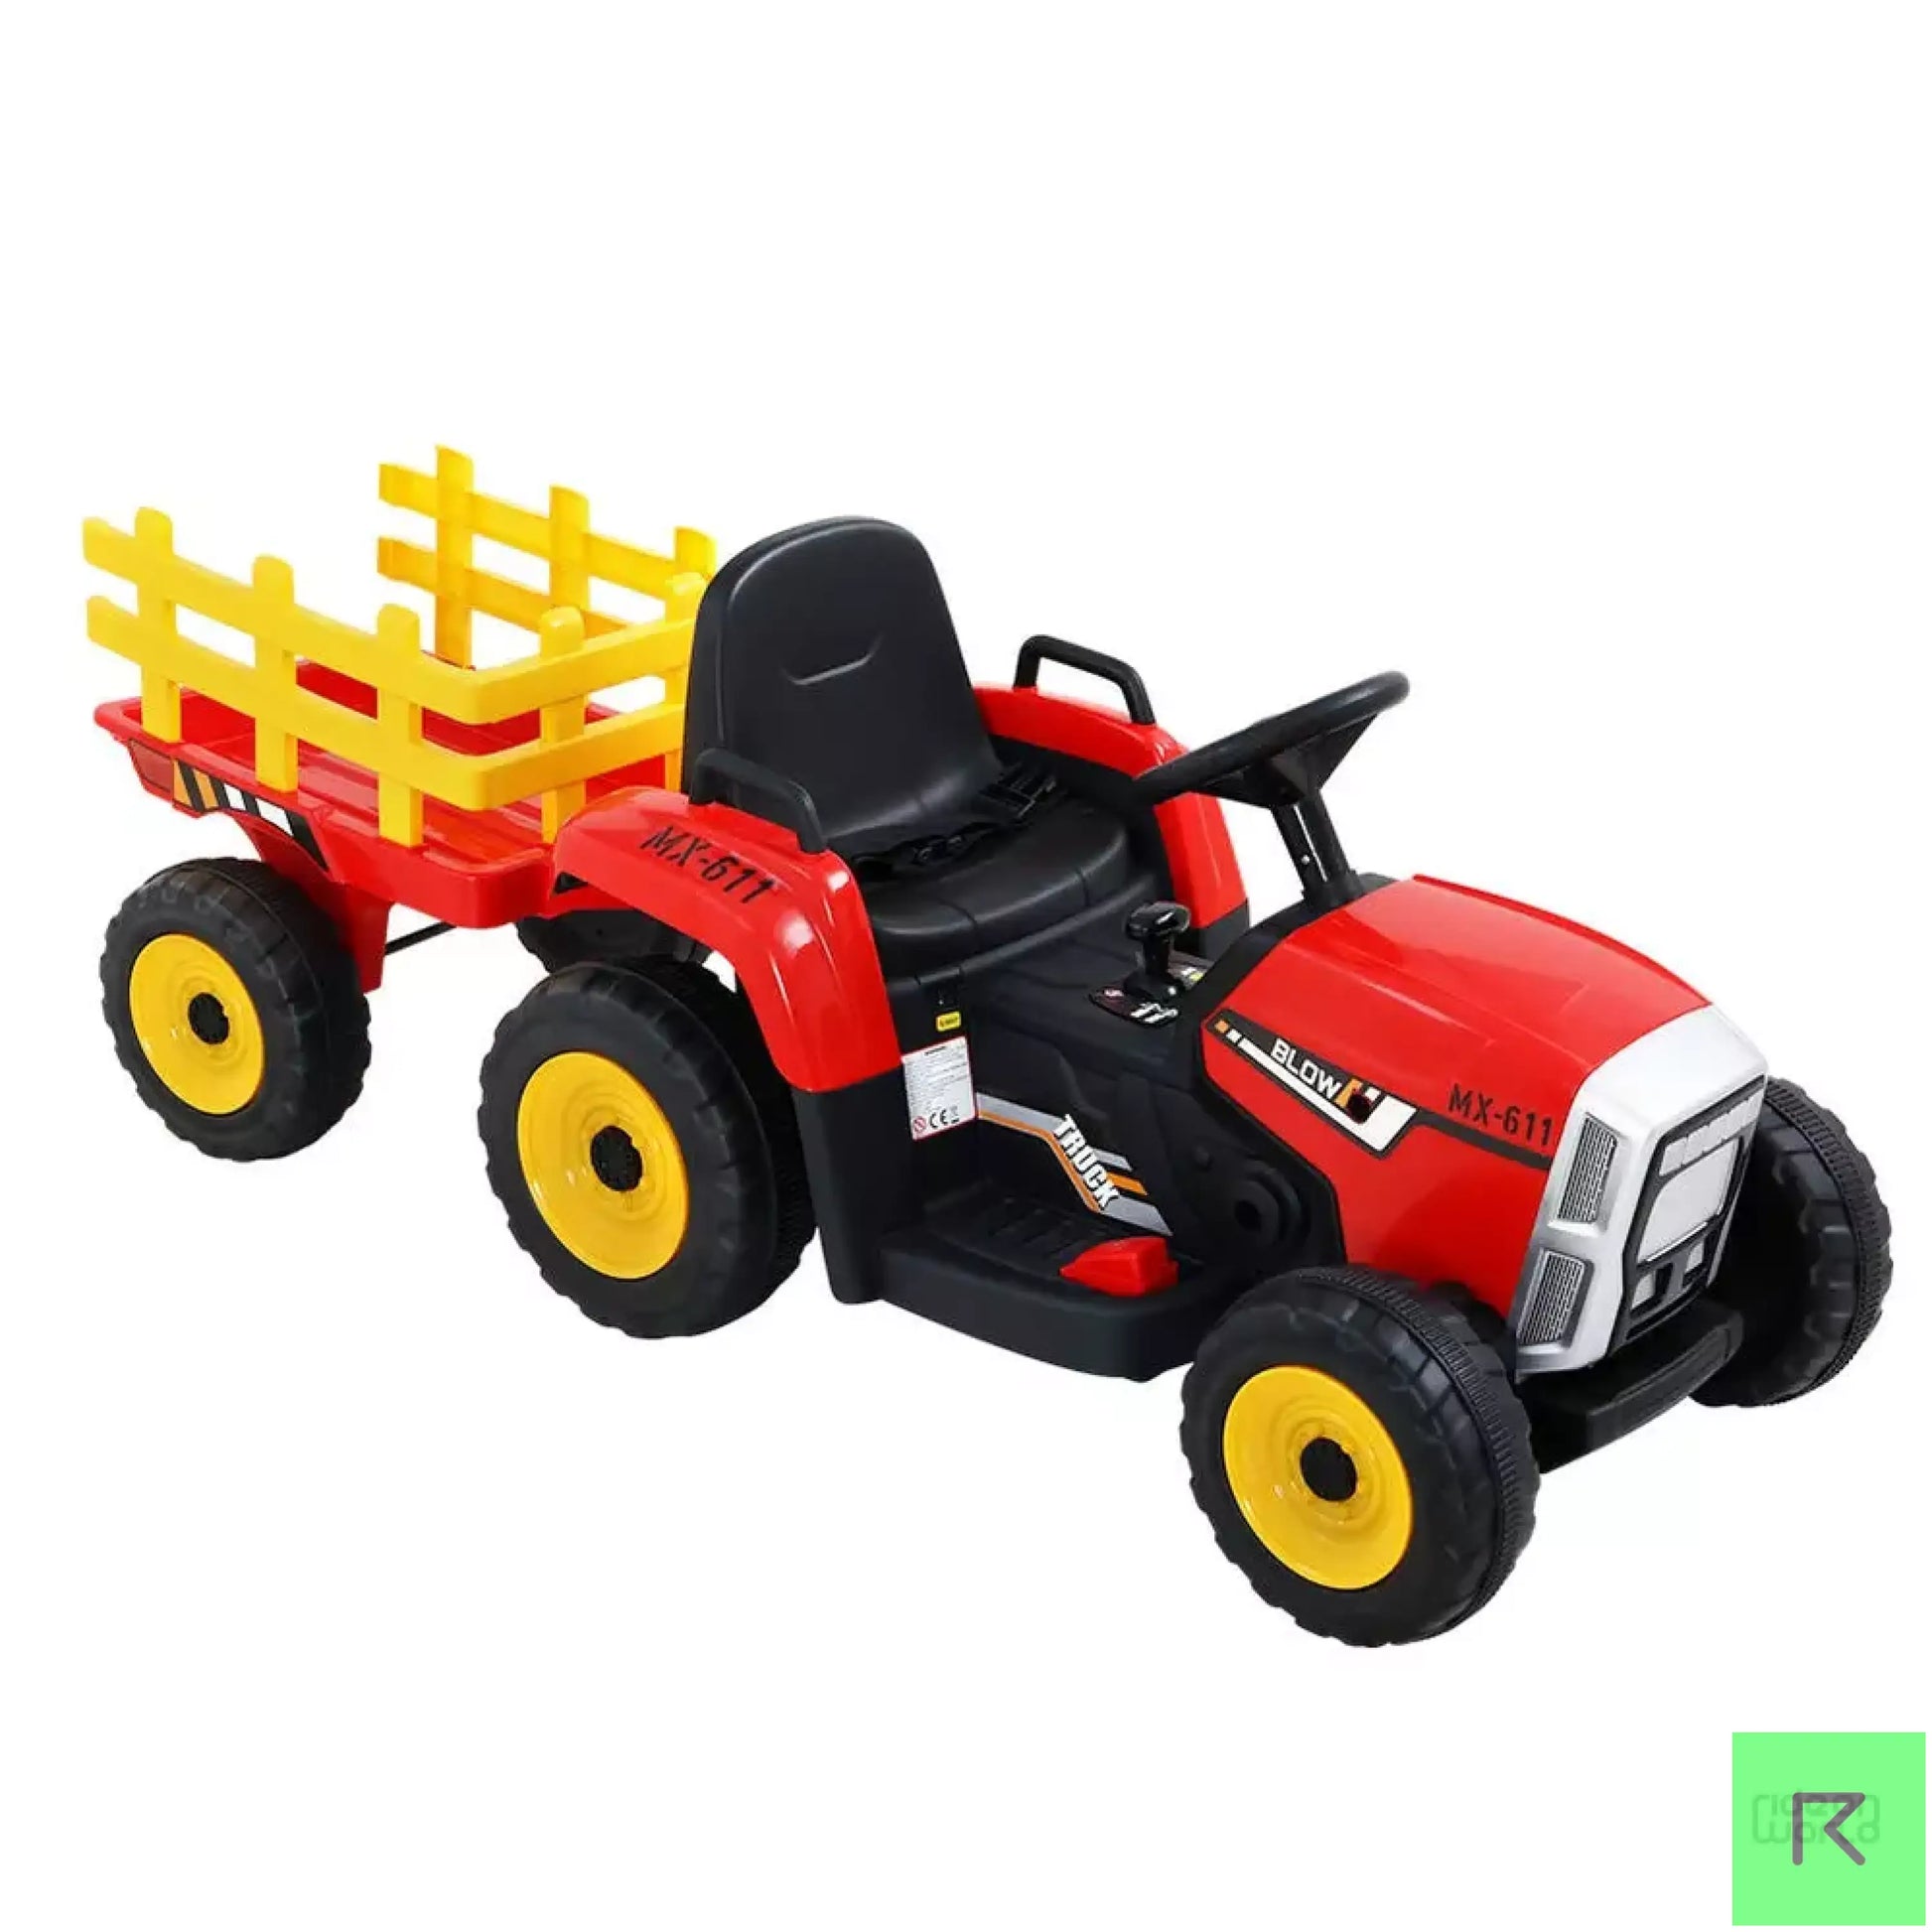 ROW KIDS Ride On Car Tractor Trailer Toy Kids Electric Cars 12V Battery Red